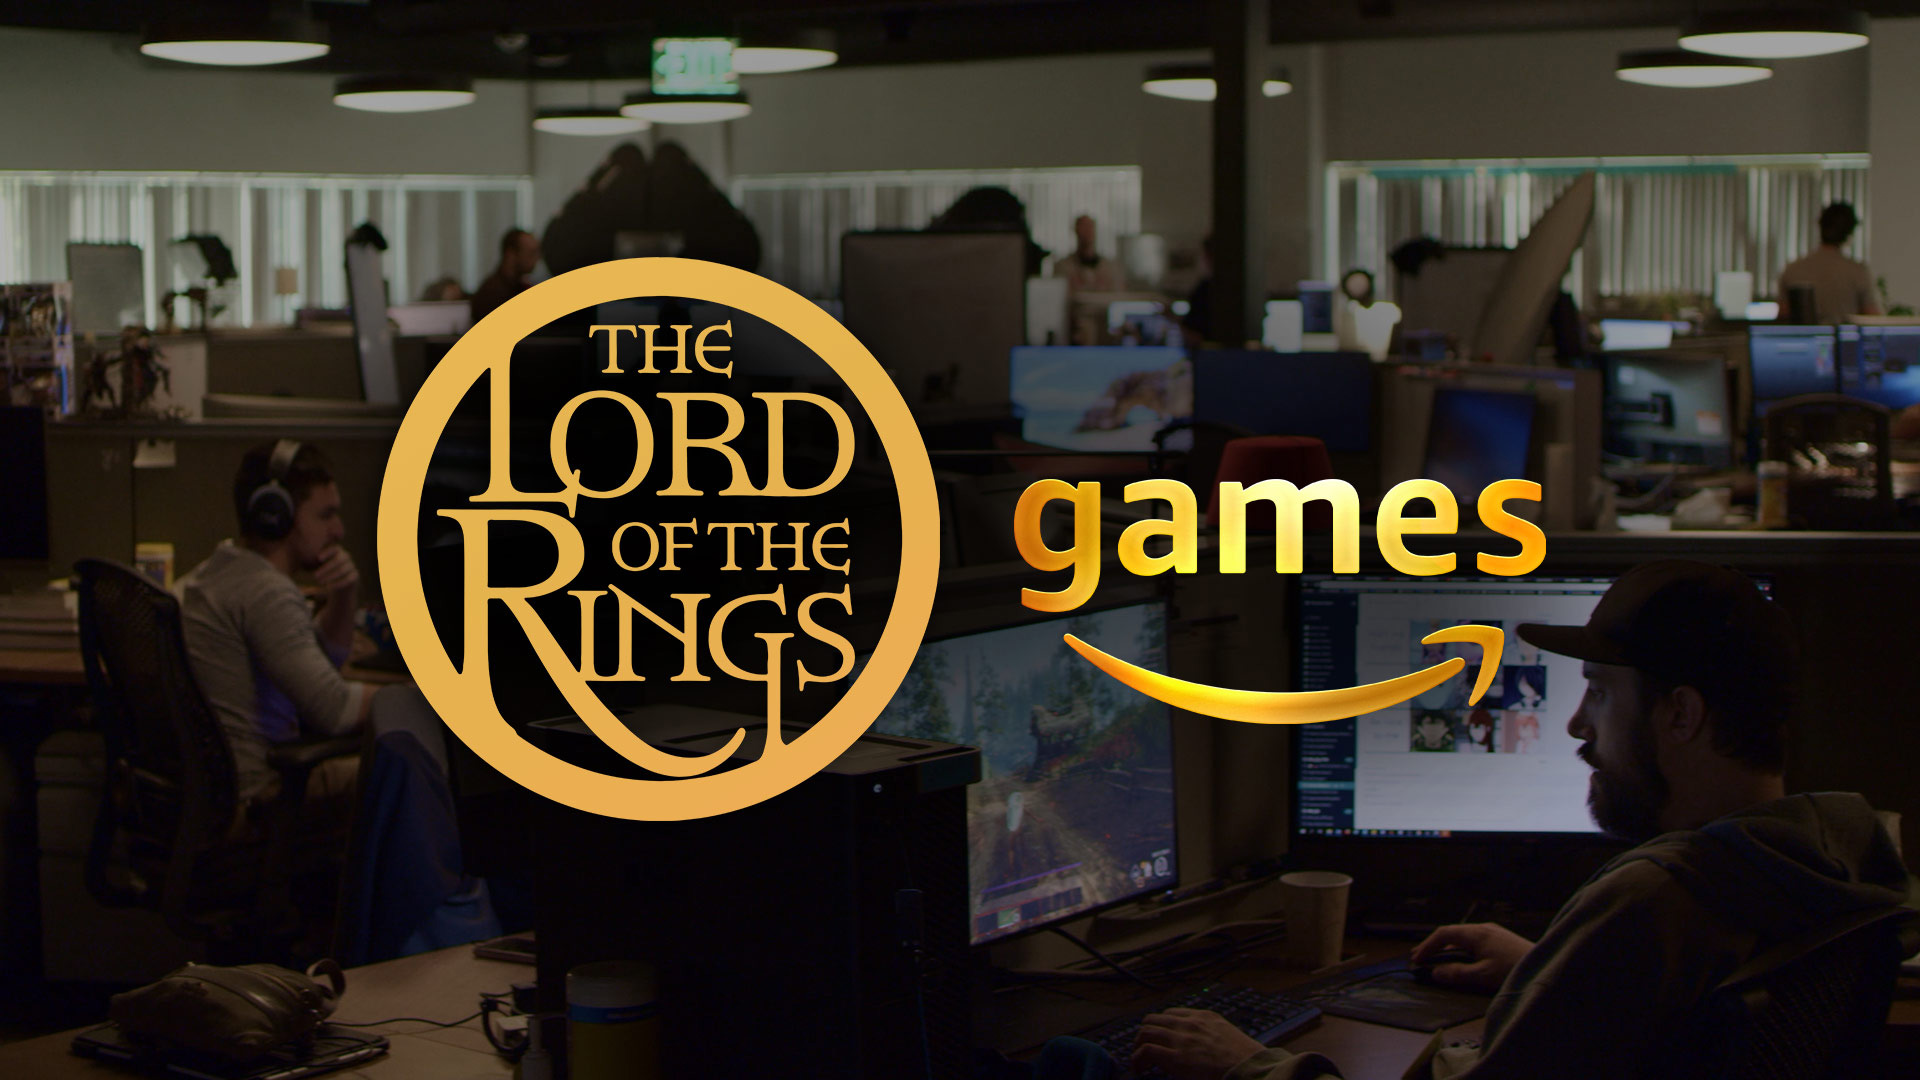 The team behind New World is set to create a new MMO set in The Lord of the Rings universe